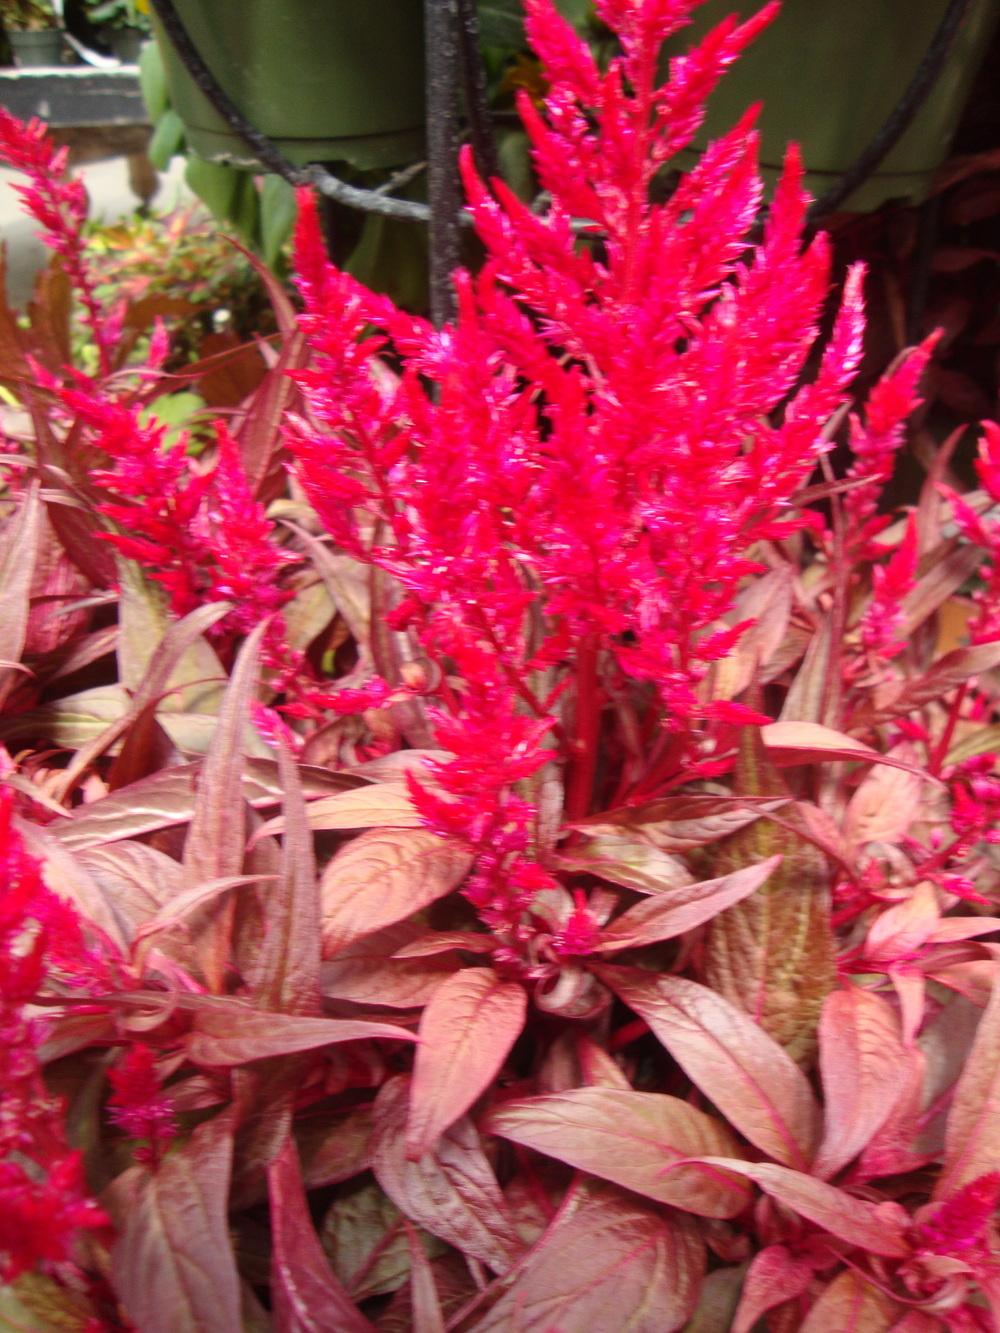 Photo of Celosia uploaded by Paul2032